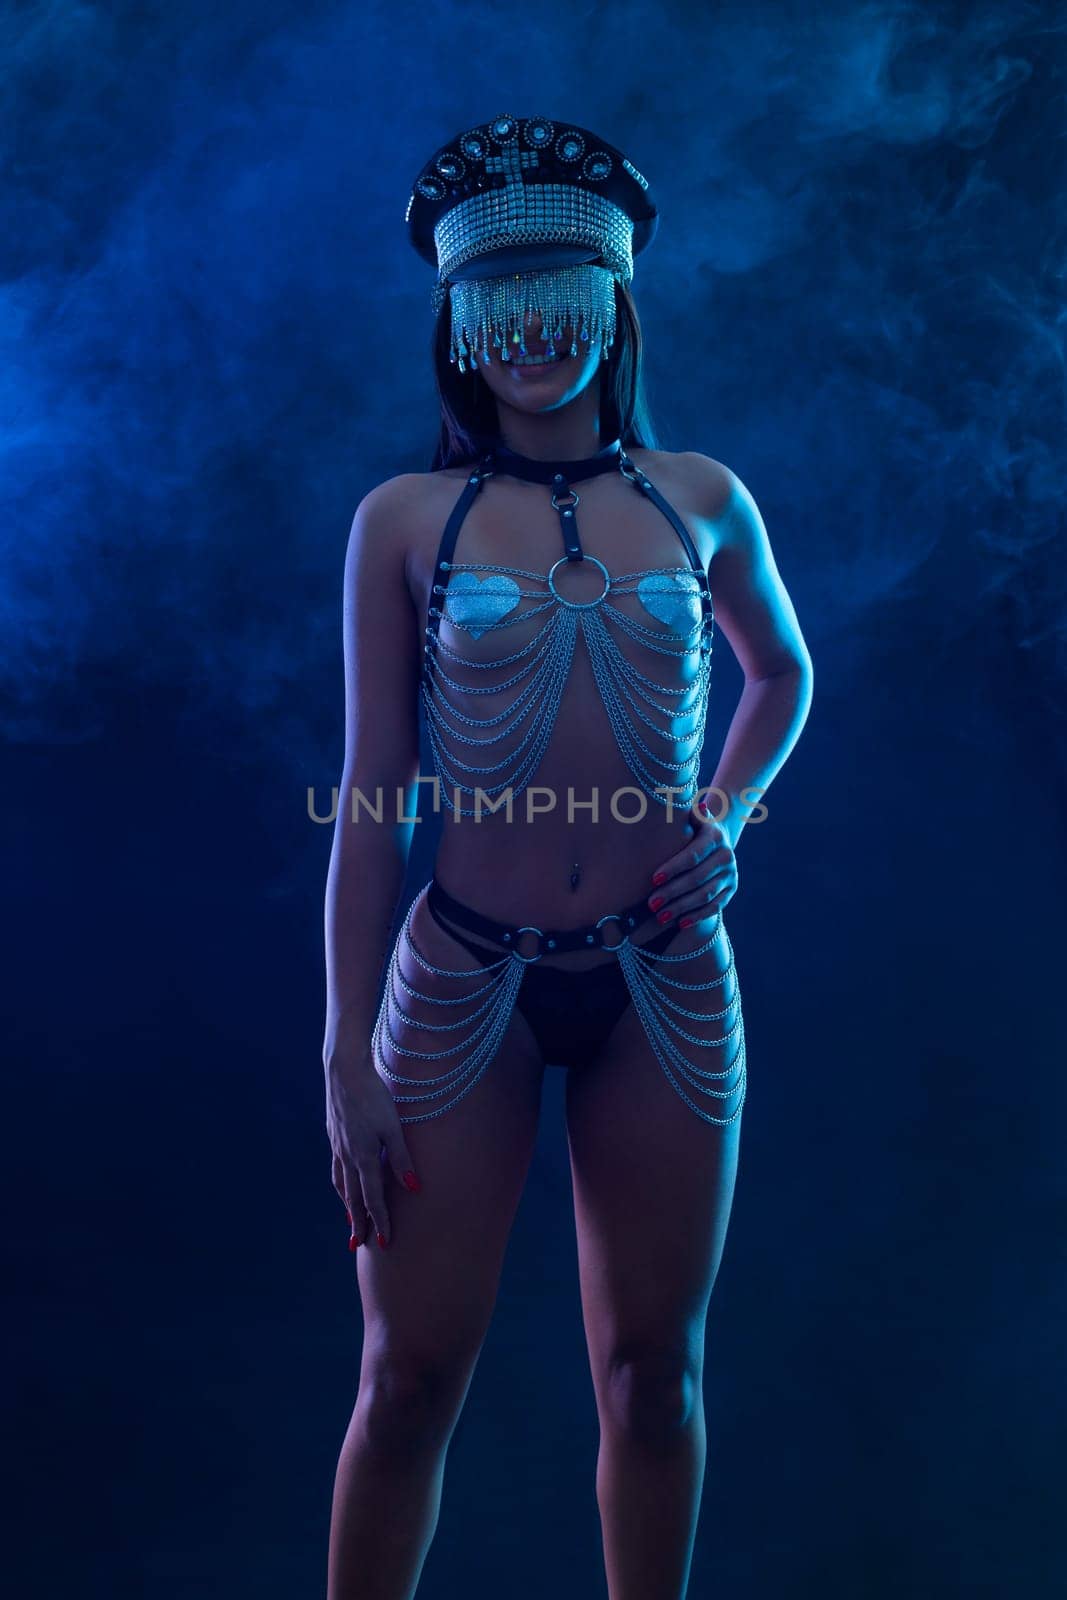 Hot dancer woman. Golden portrait of sexy TDJ girl at the night club party. Mixtape or book covers - download high resolution picture for your song or music clip. by MikeOrlov